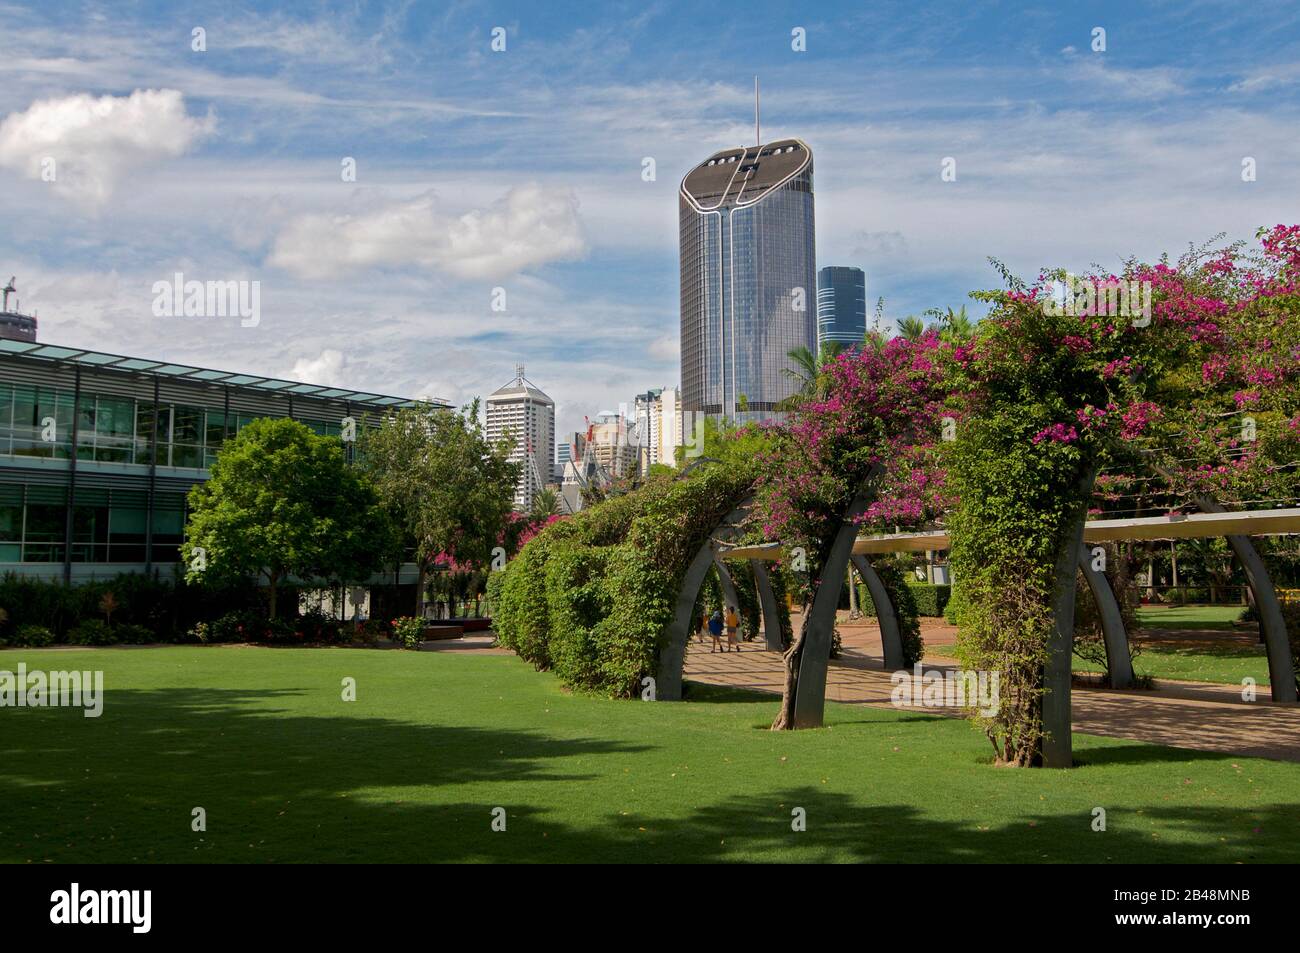 View of 1 Williams Street tower and Grand Arbour structure covered by blooming Bouganvillea flowers in South Bank parklands in Brisbane. The structure Stock Photo